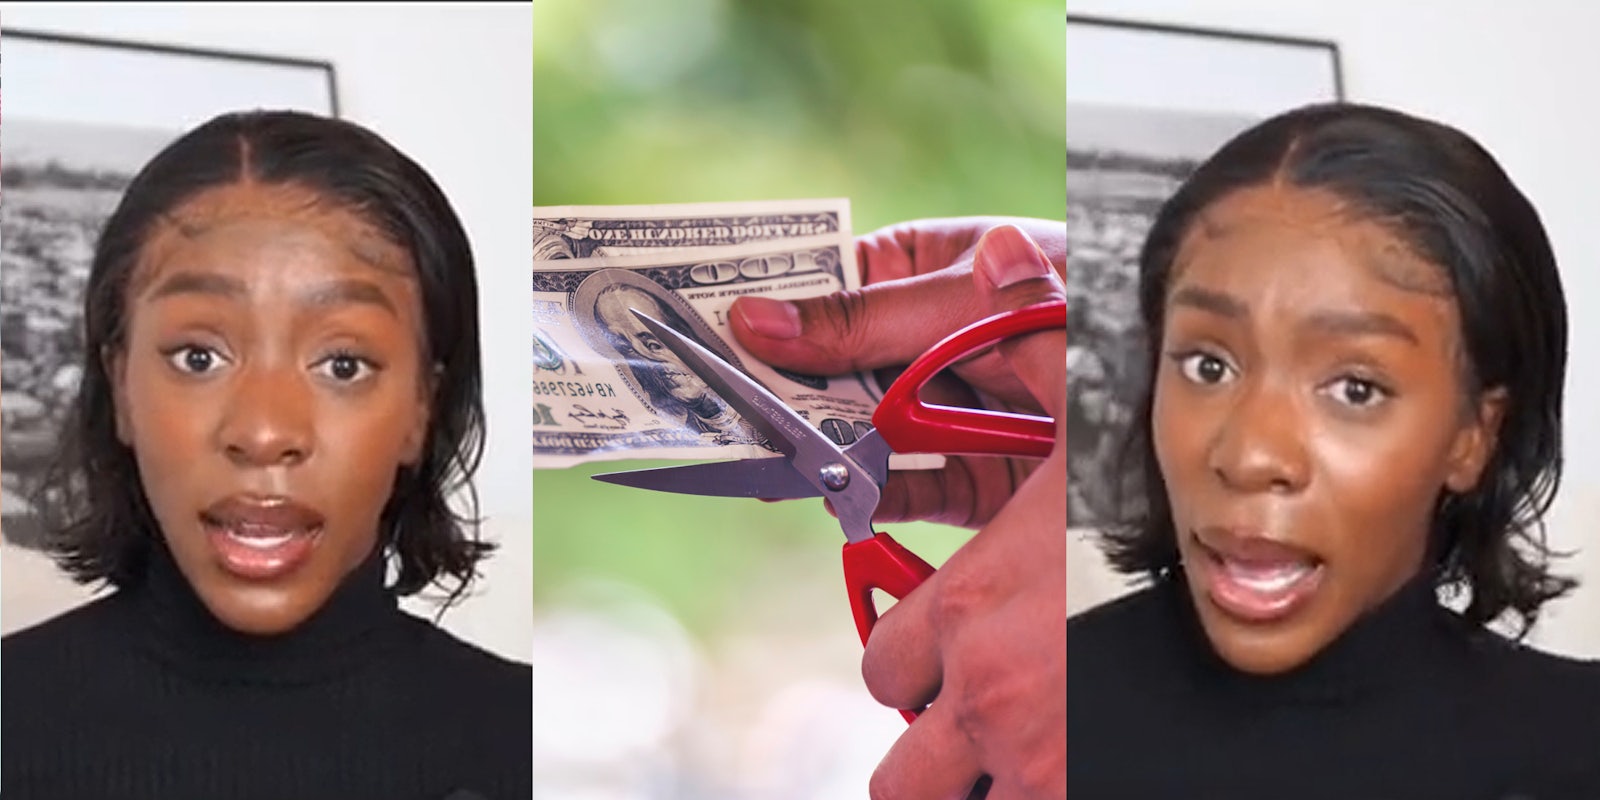 woman speaking in front of white wall with framed photo (l) hands holding scissors cutting cash in front of blurred green background (c) woman speaking in front of white wall with framed photo (r)